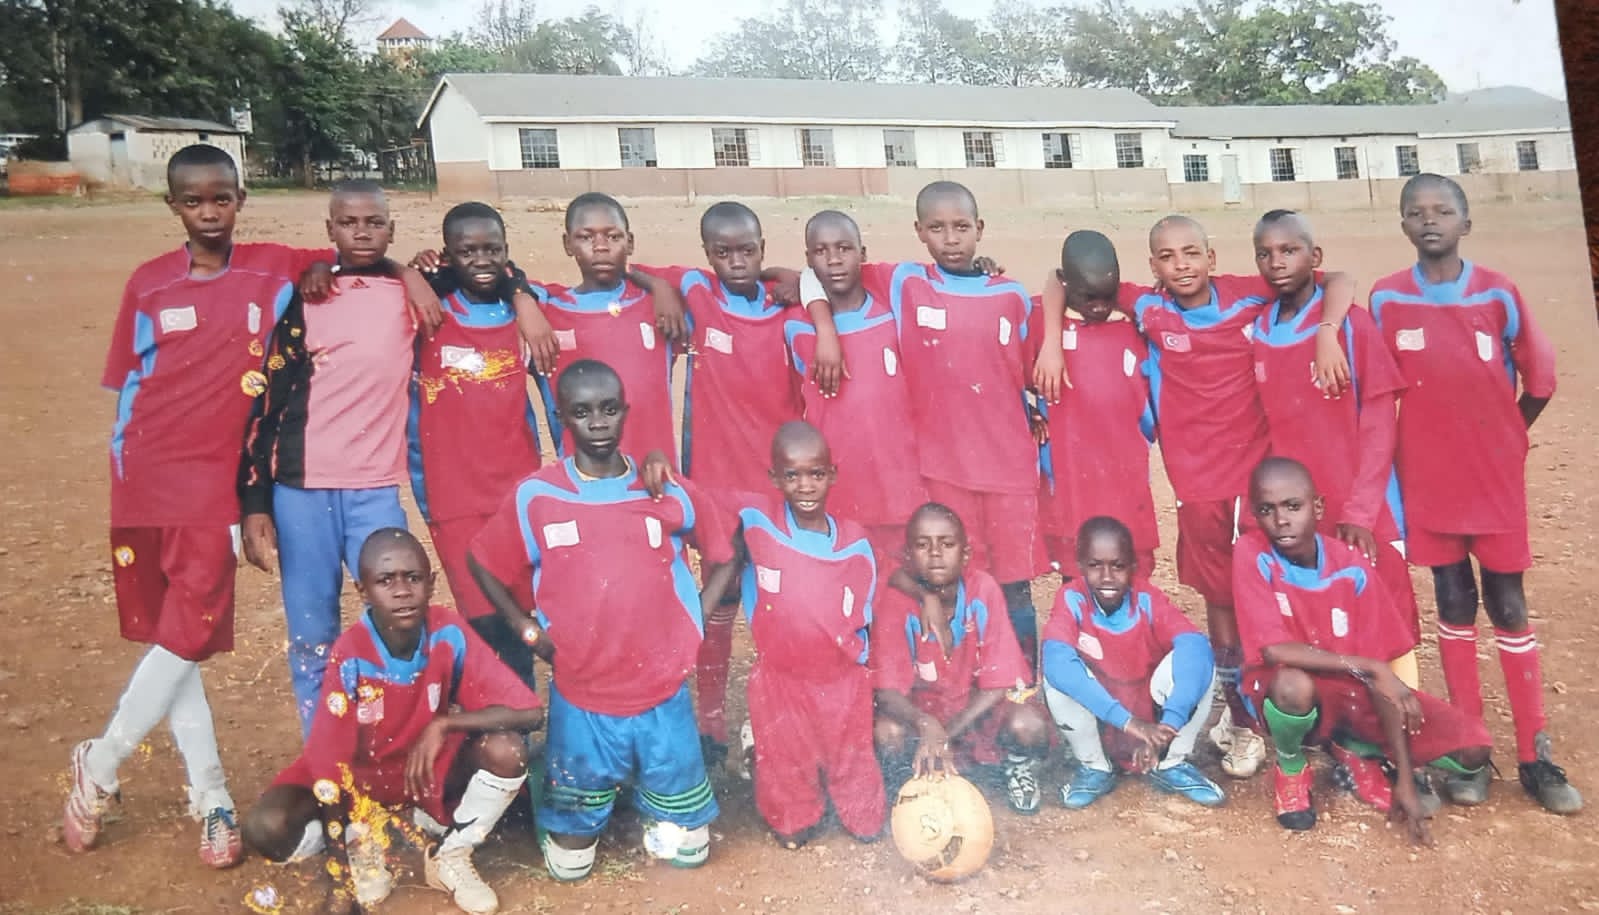 Joseph (third from the right, top row) and his team mates before a match 